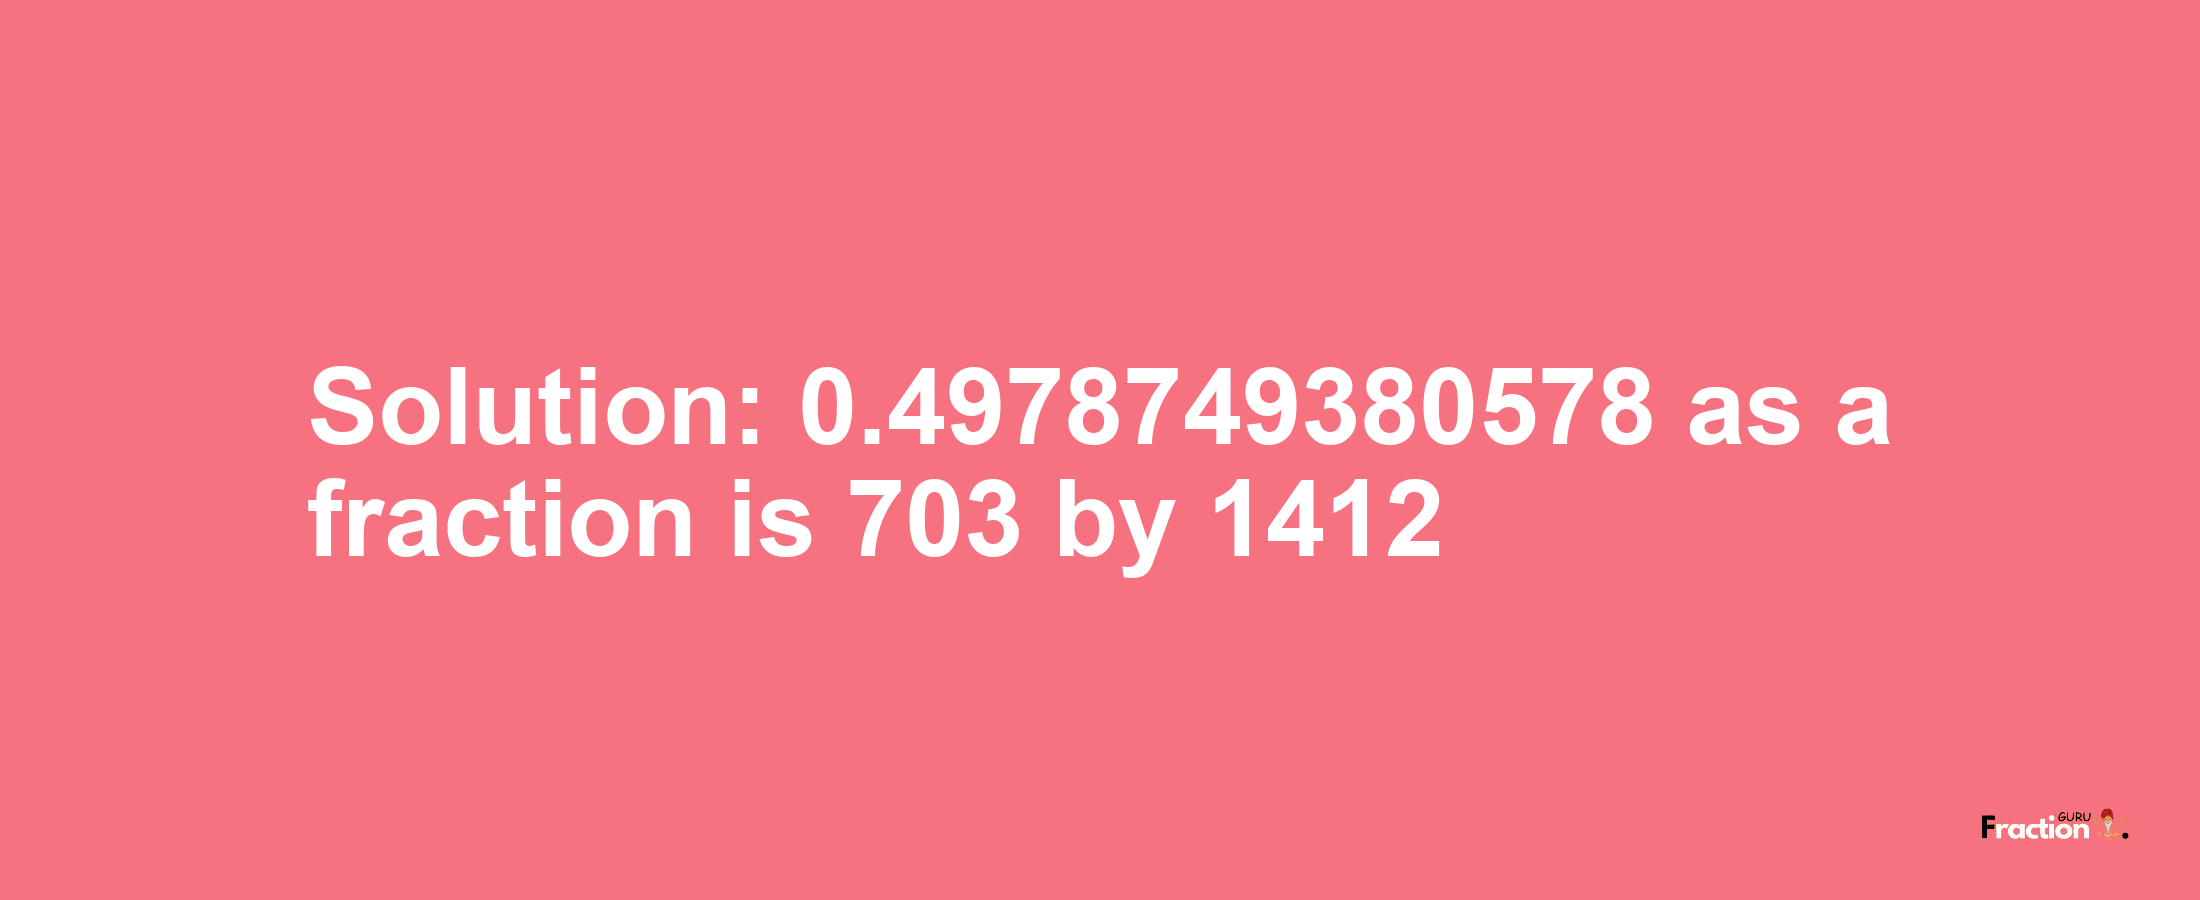 Solution:0.4978749380578 as a fraction is 703/1412